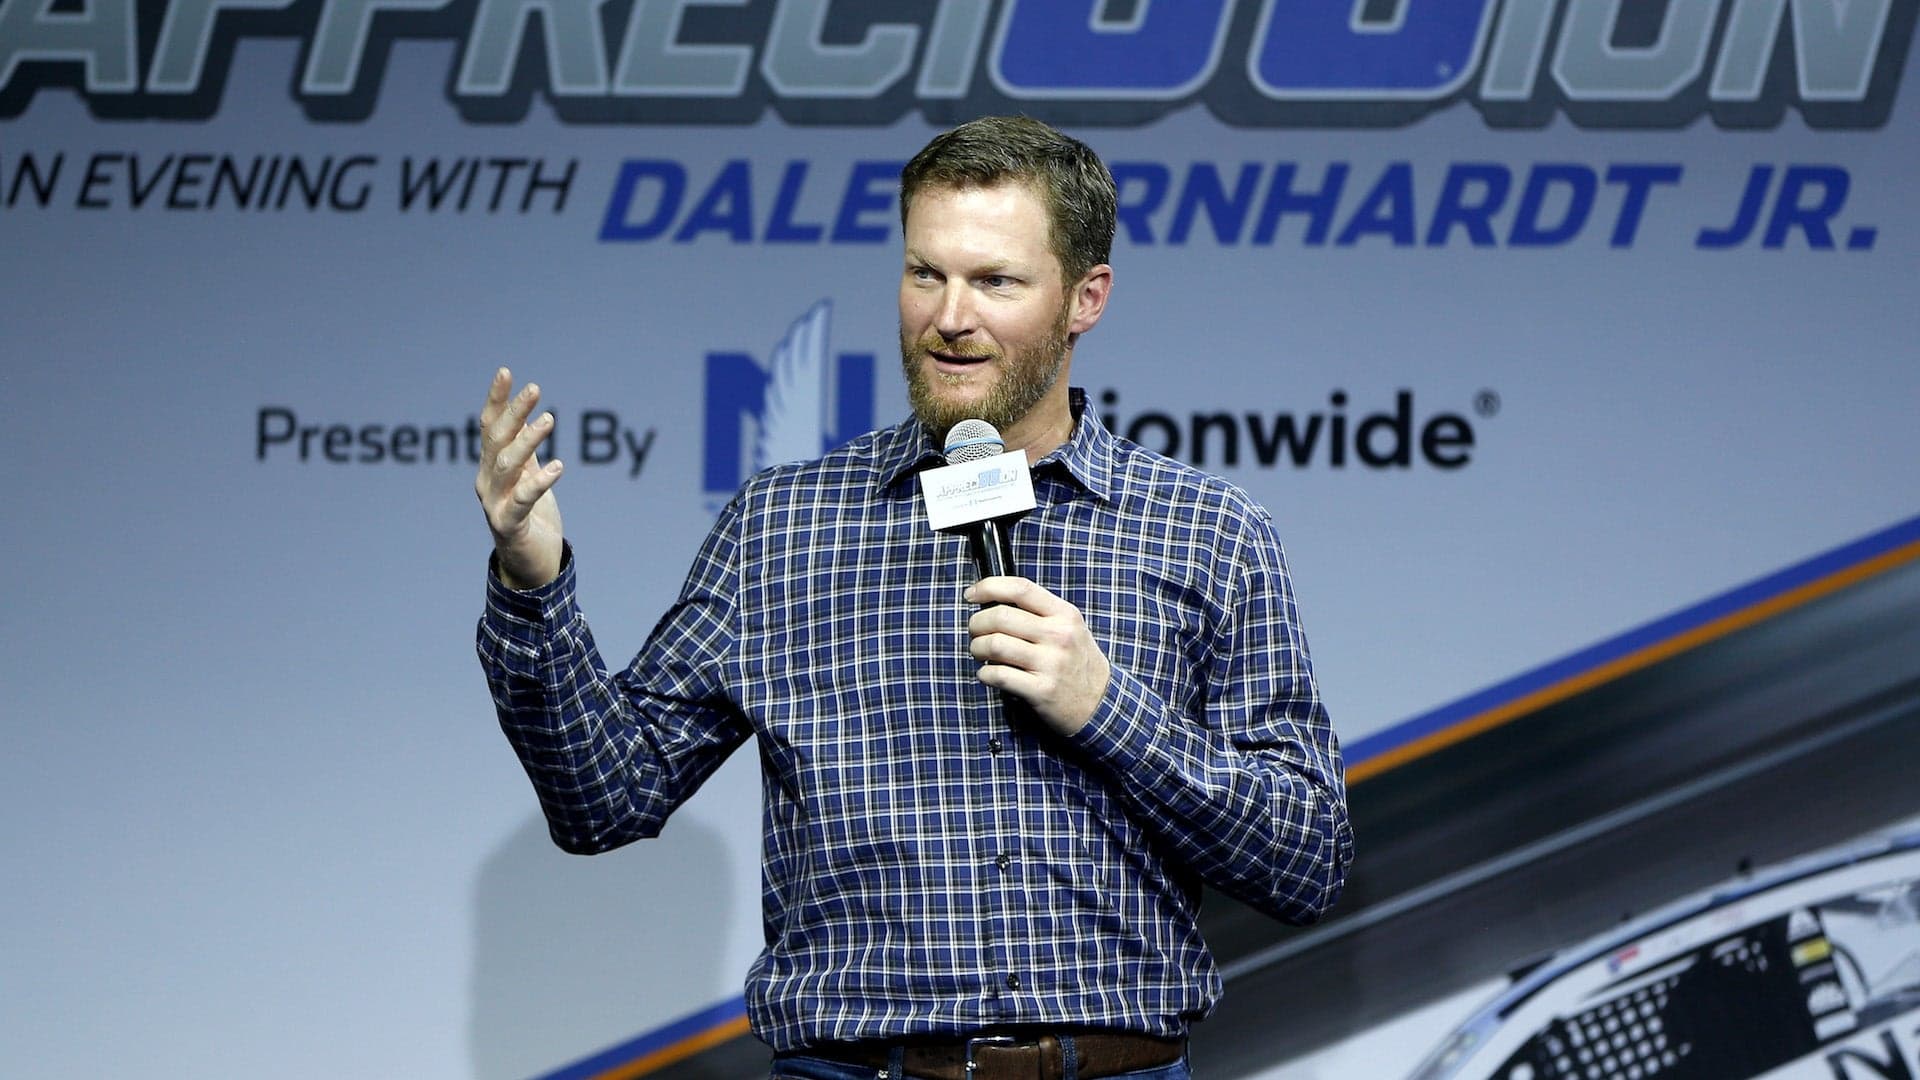 NASCAR Drivers Put on Dale Earnhardt Jr.’s Gloves for a Good Cause